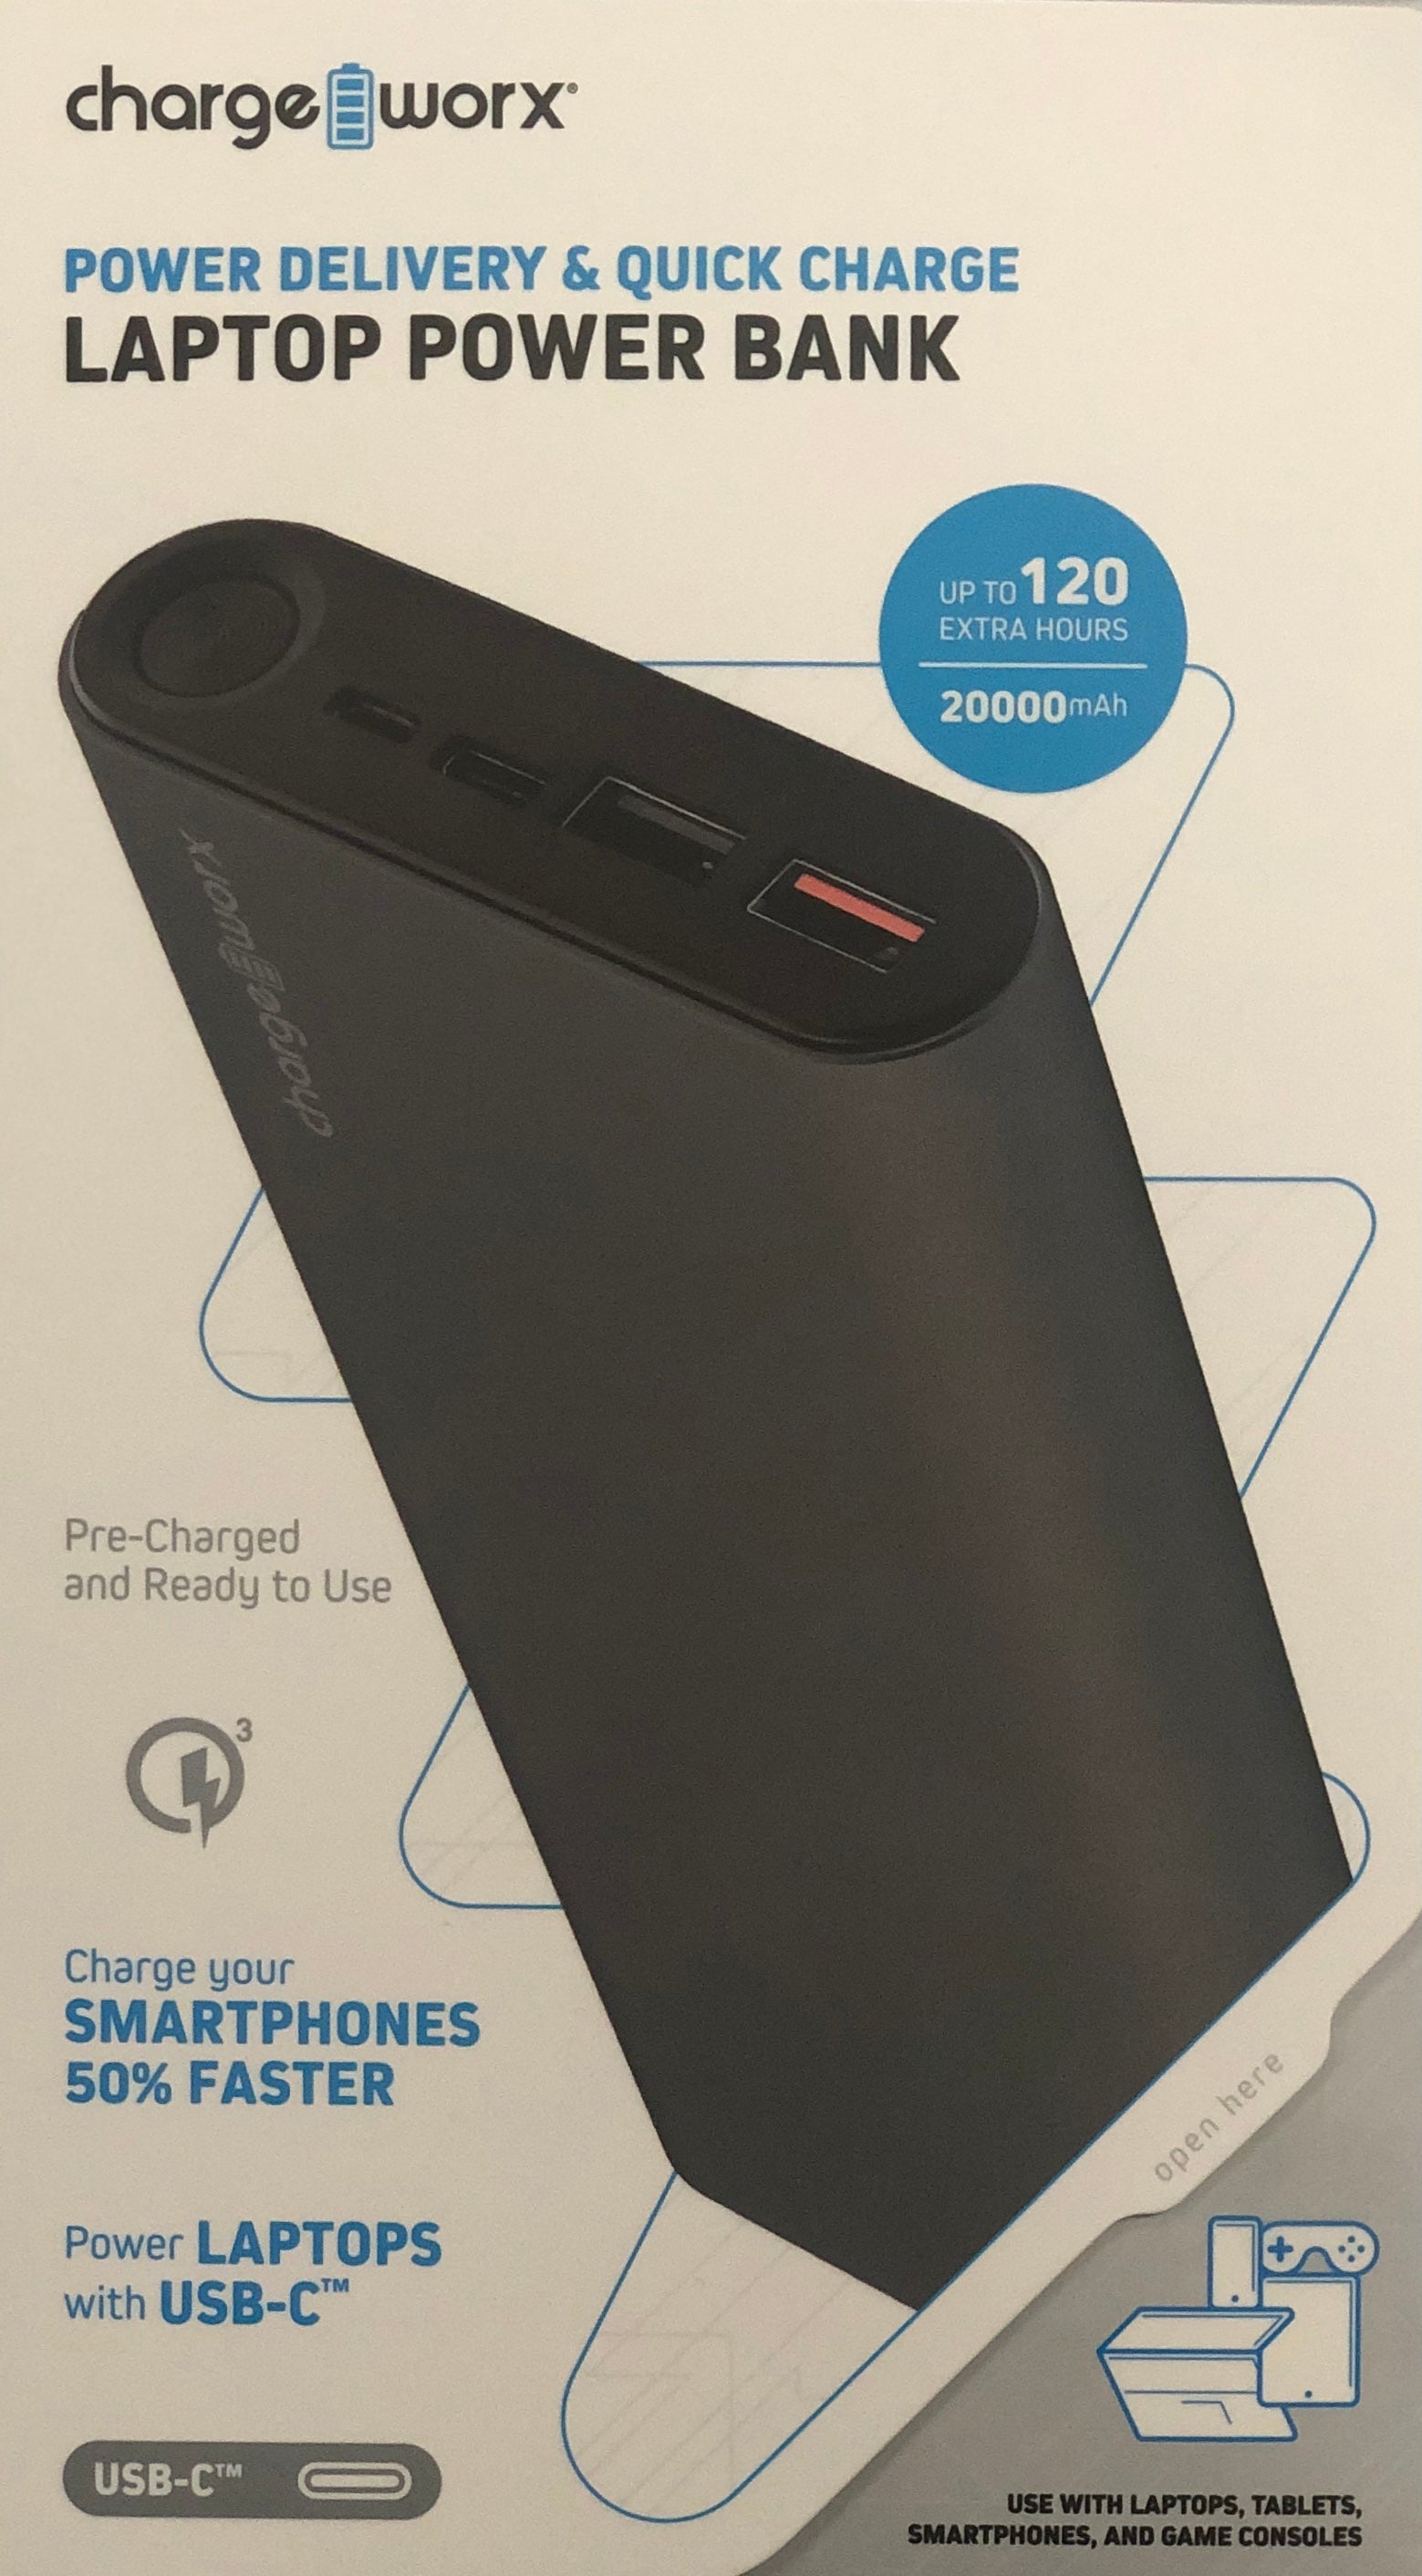 Chargeworx 20000mAh Laptop Power Bank for 120 Hour Charge